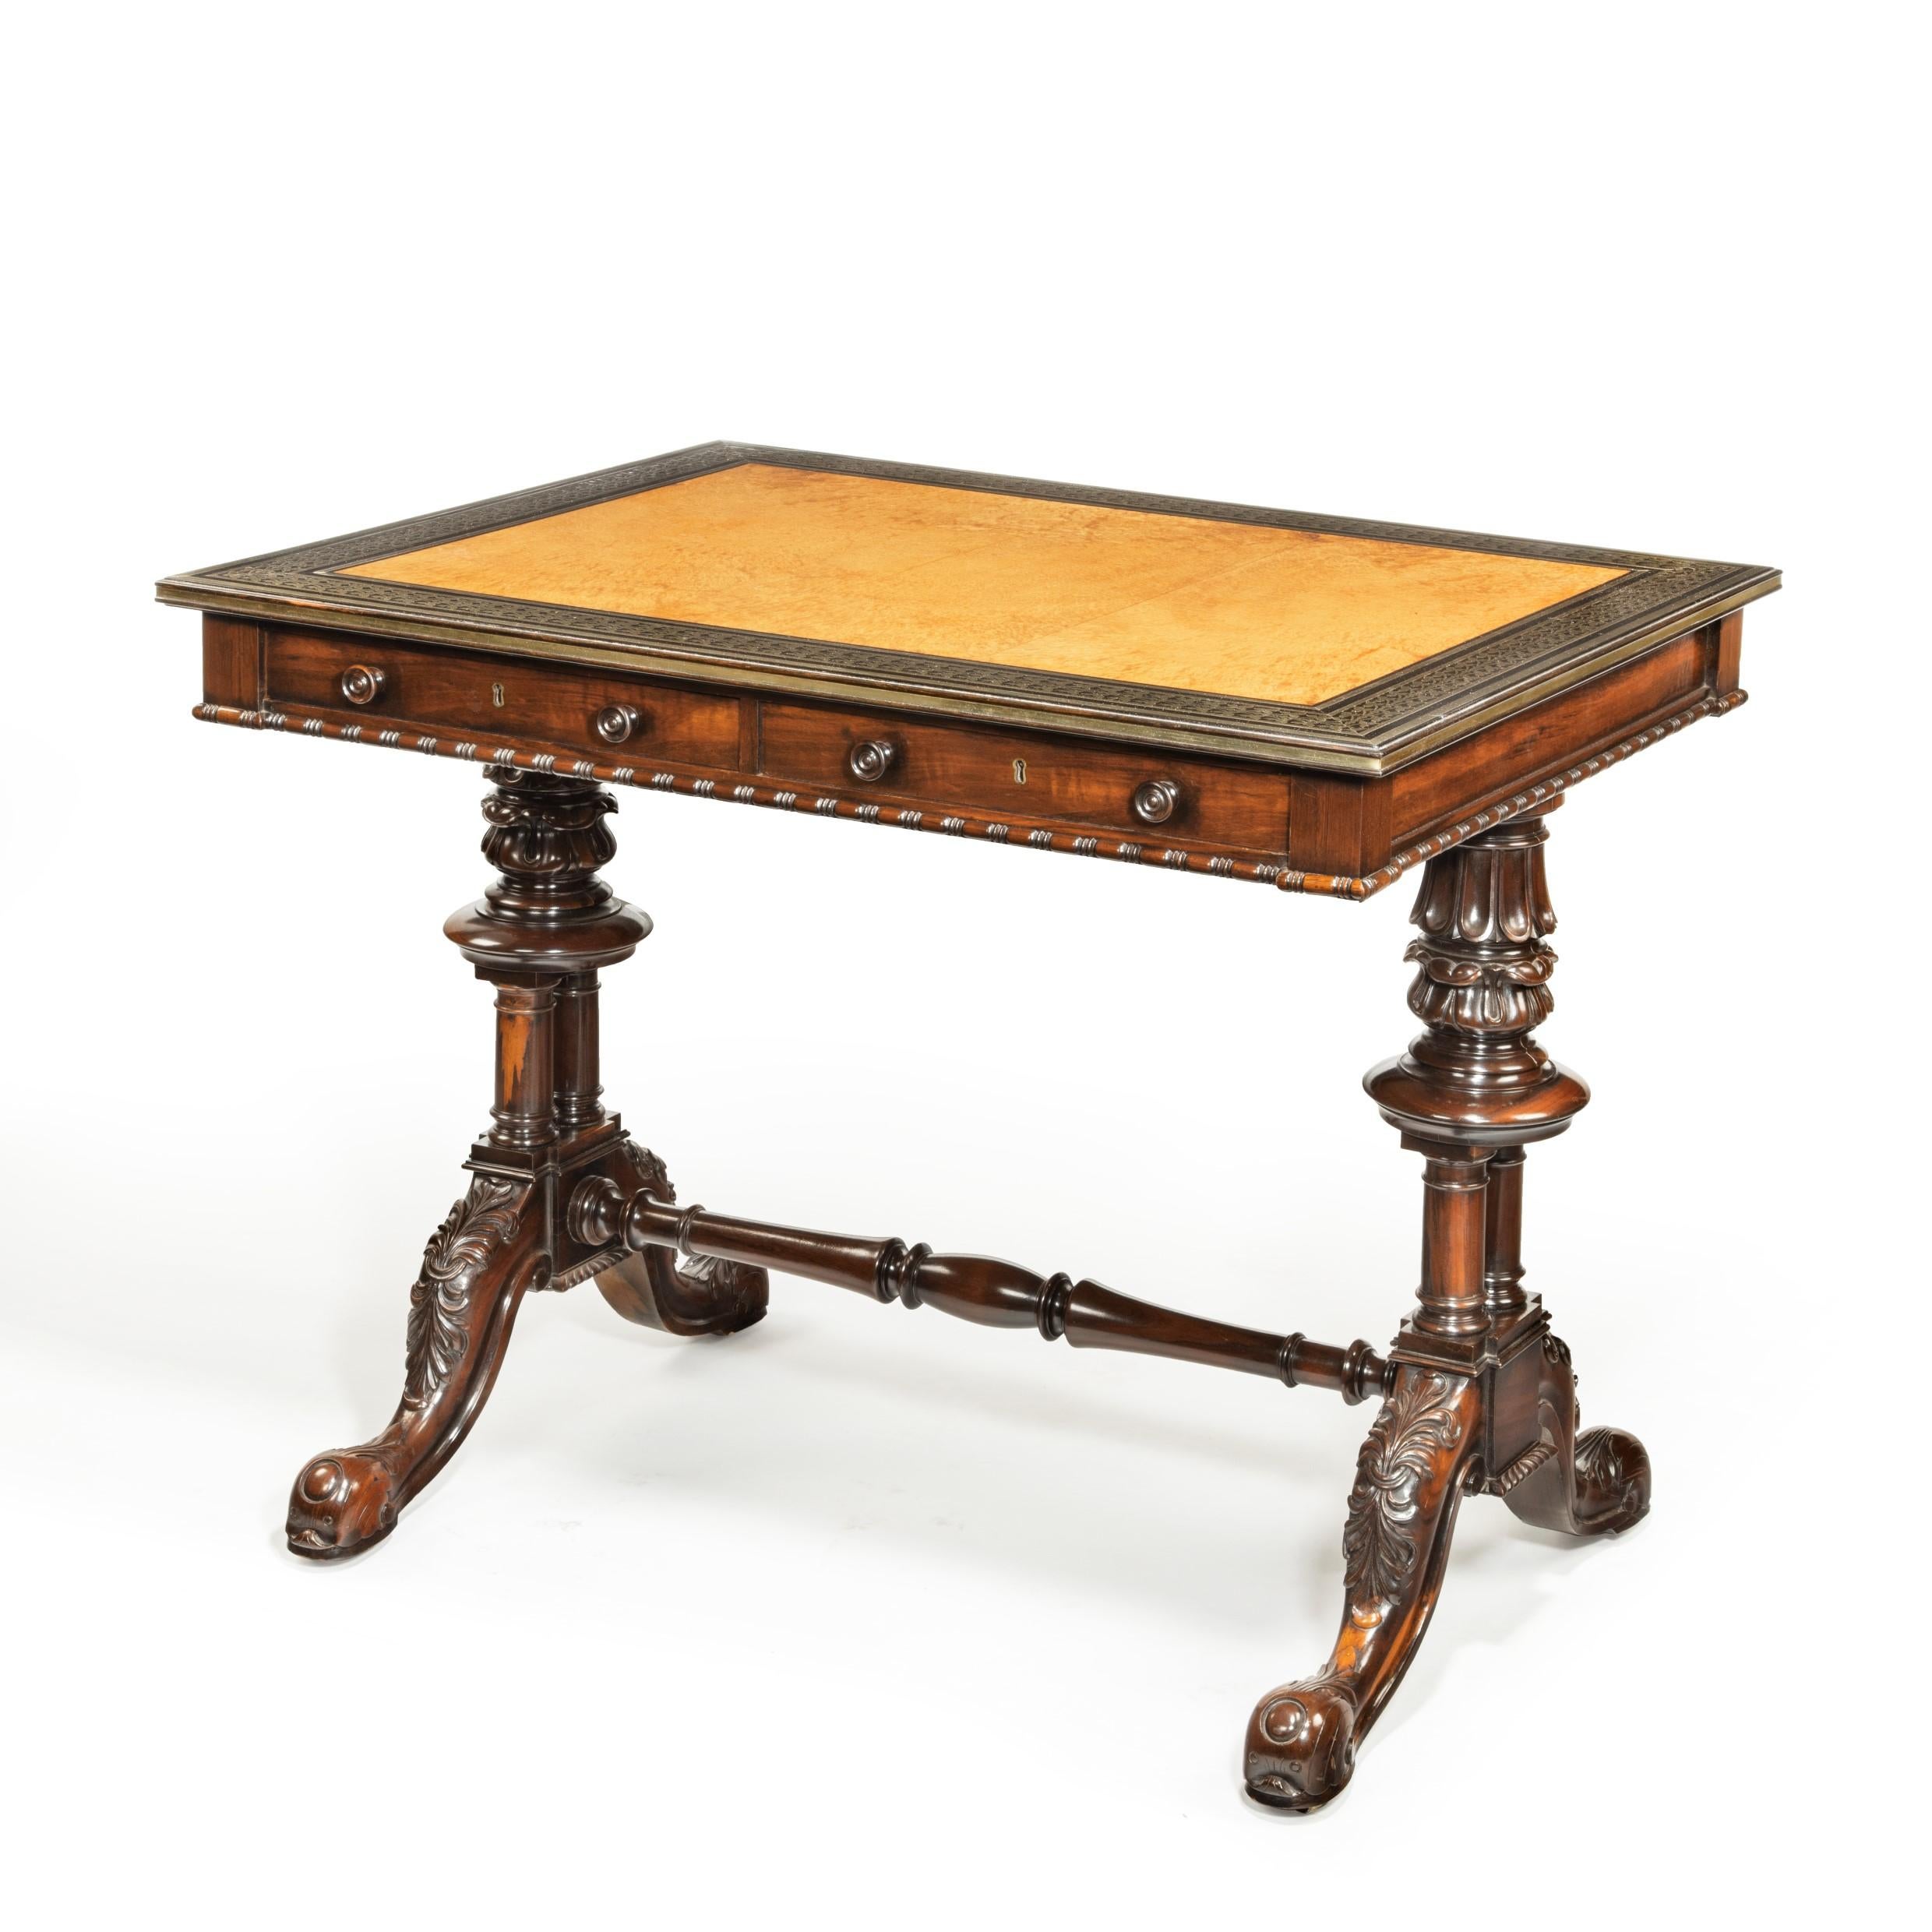 Striking Goncalo Alves 'Albuera Wood' Writing Table Attributed to Gillows For Sale 2